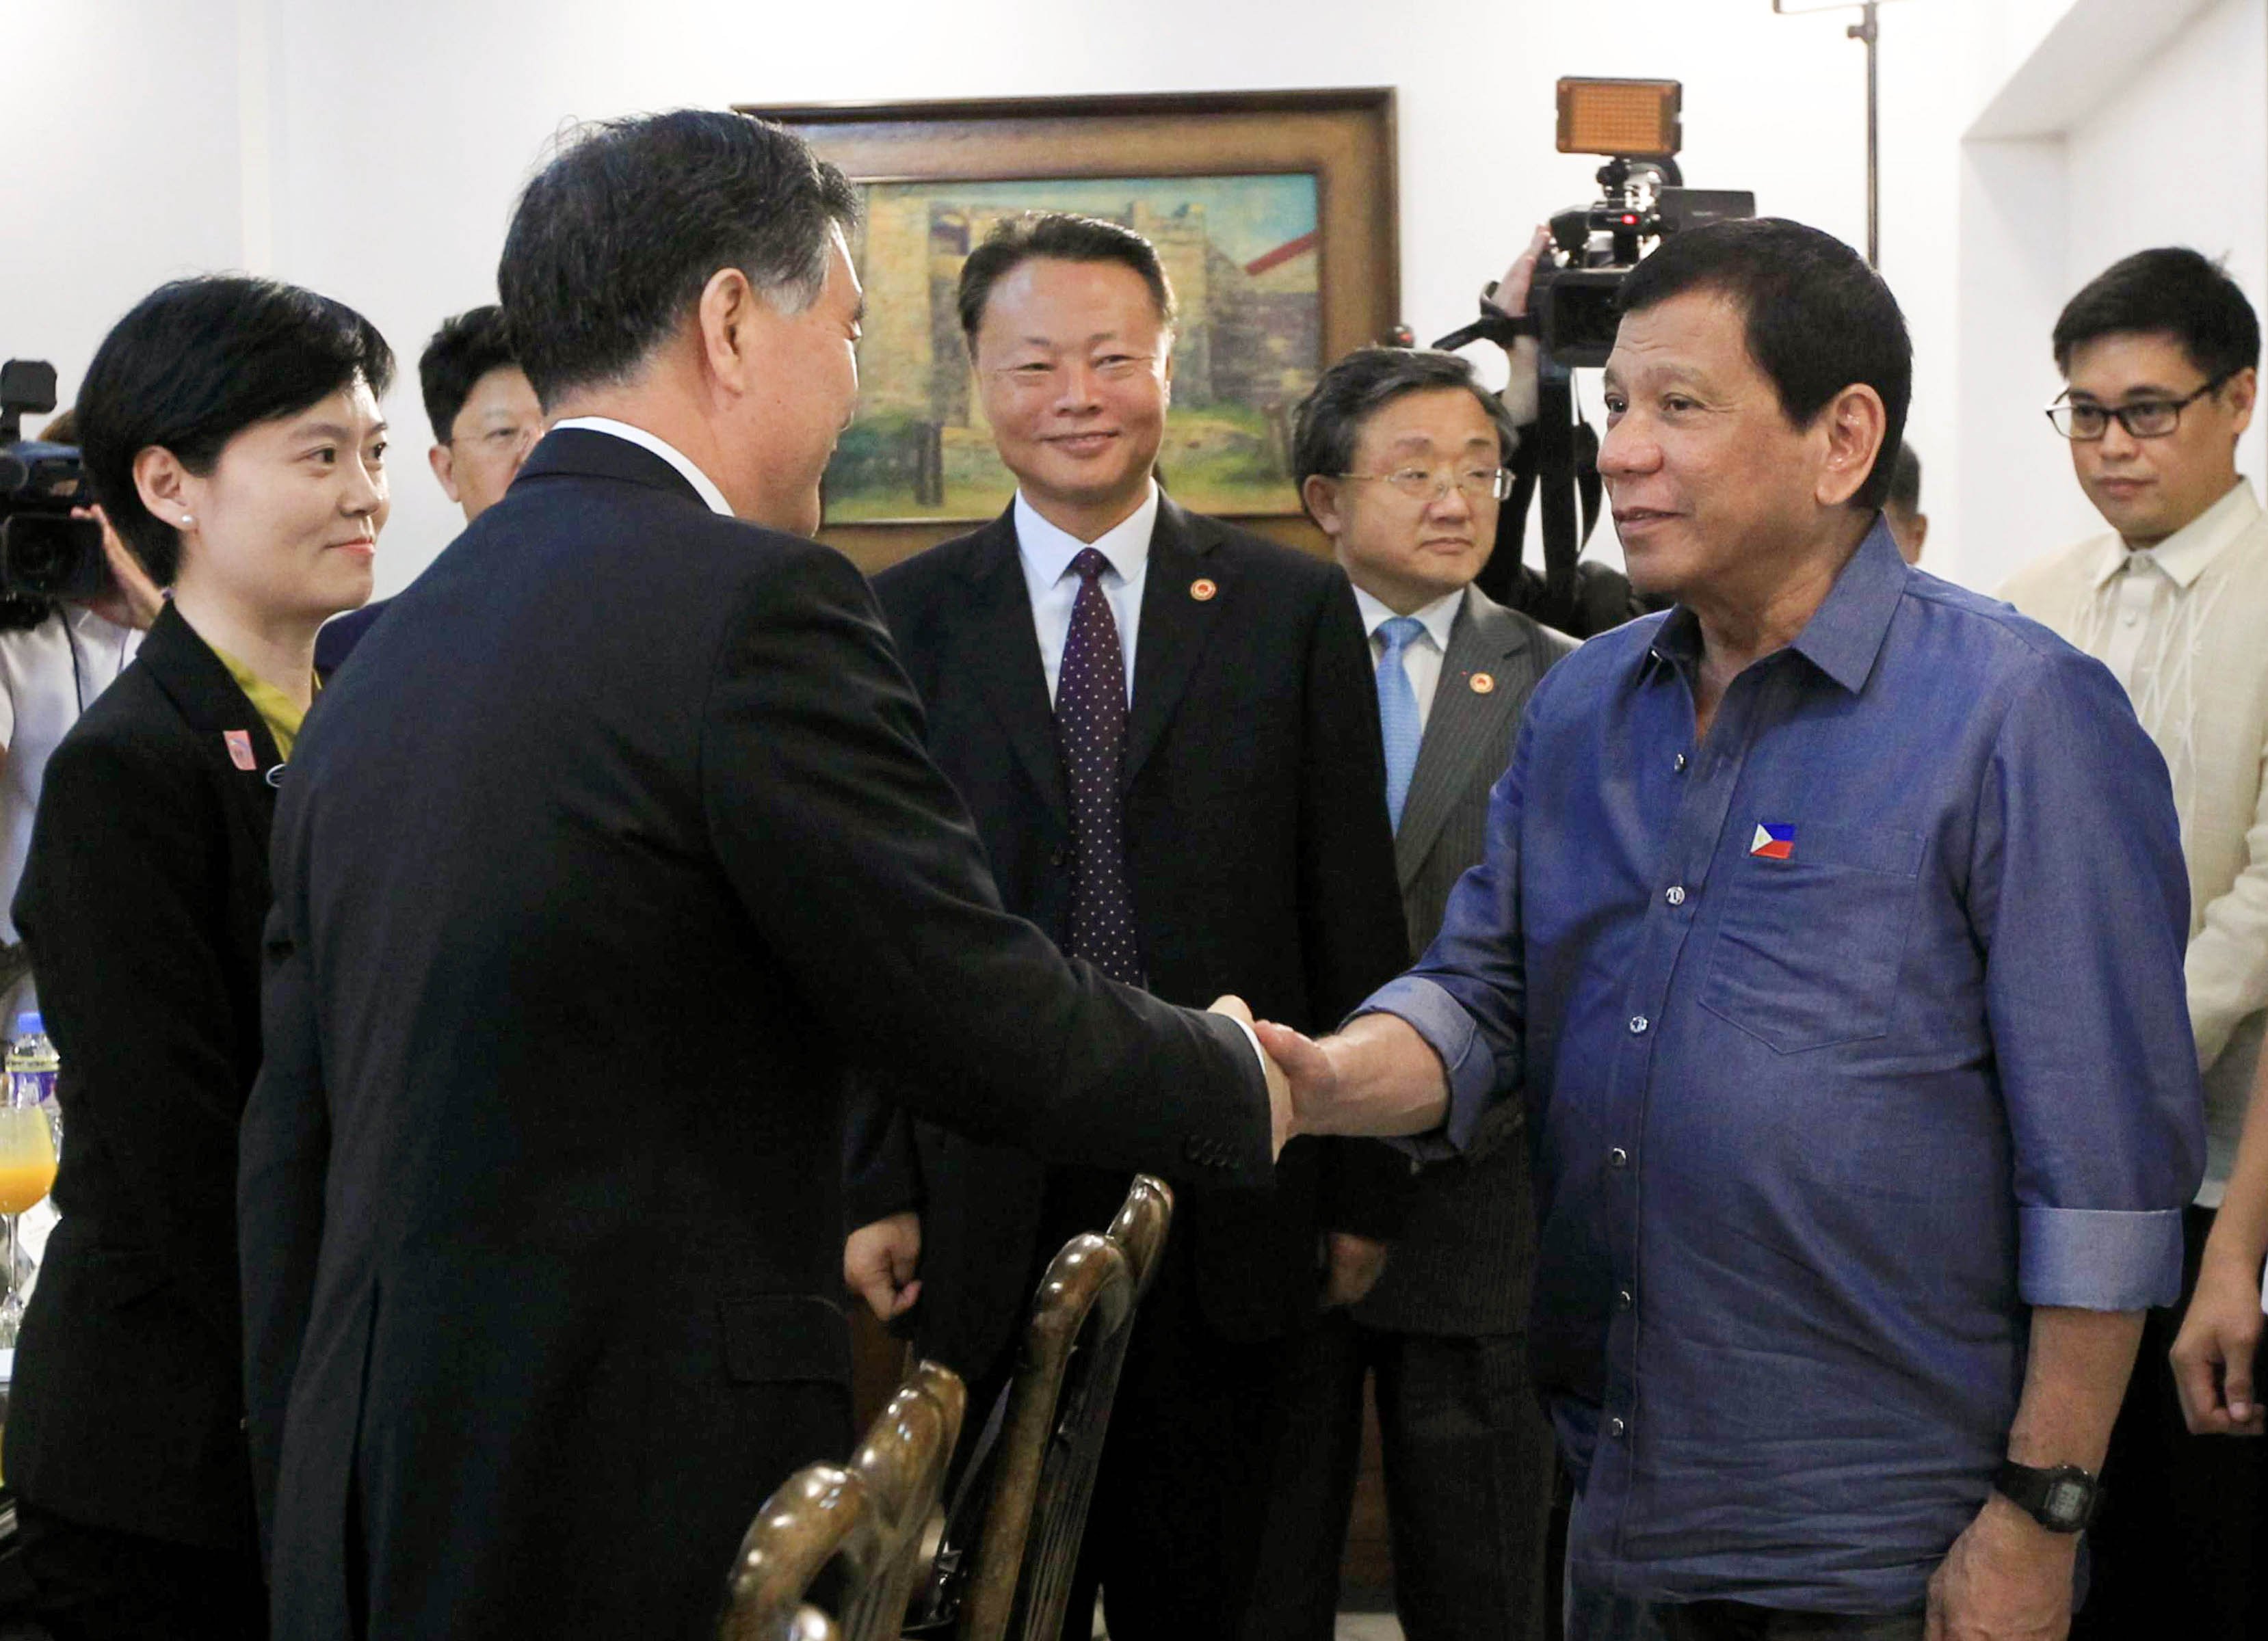 President Rodrigo Duterte welcomes Vice Premier of the State Council of the People’s Republic of China Wang Yang